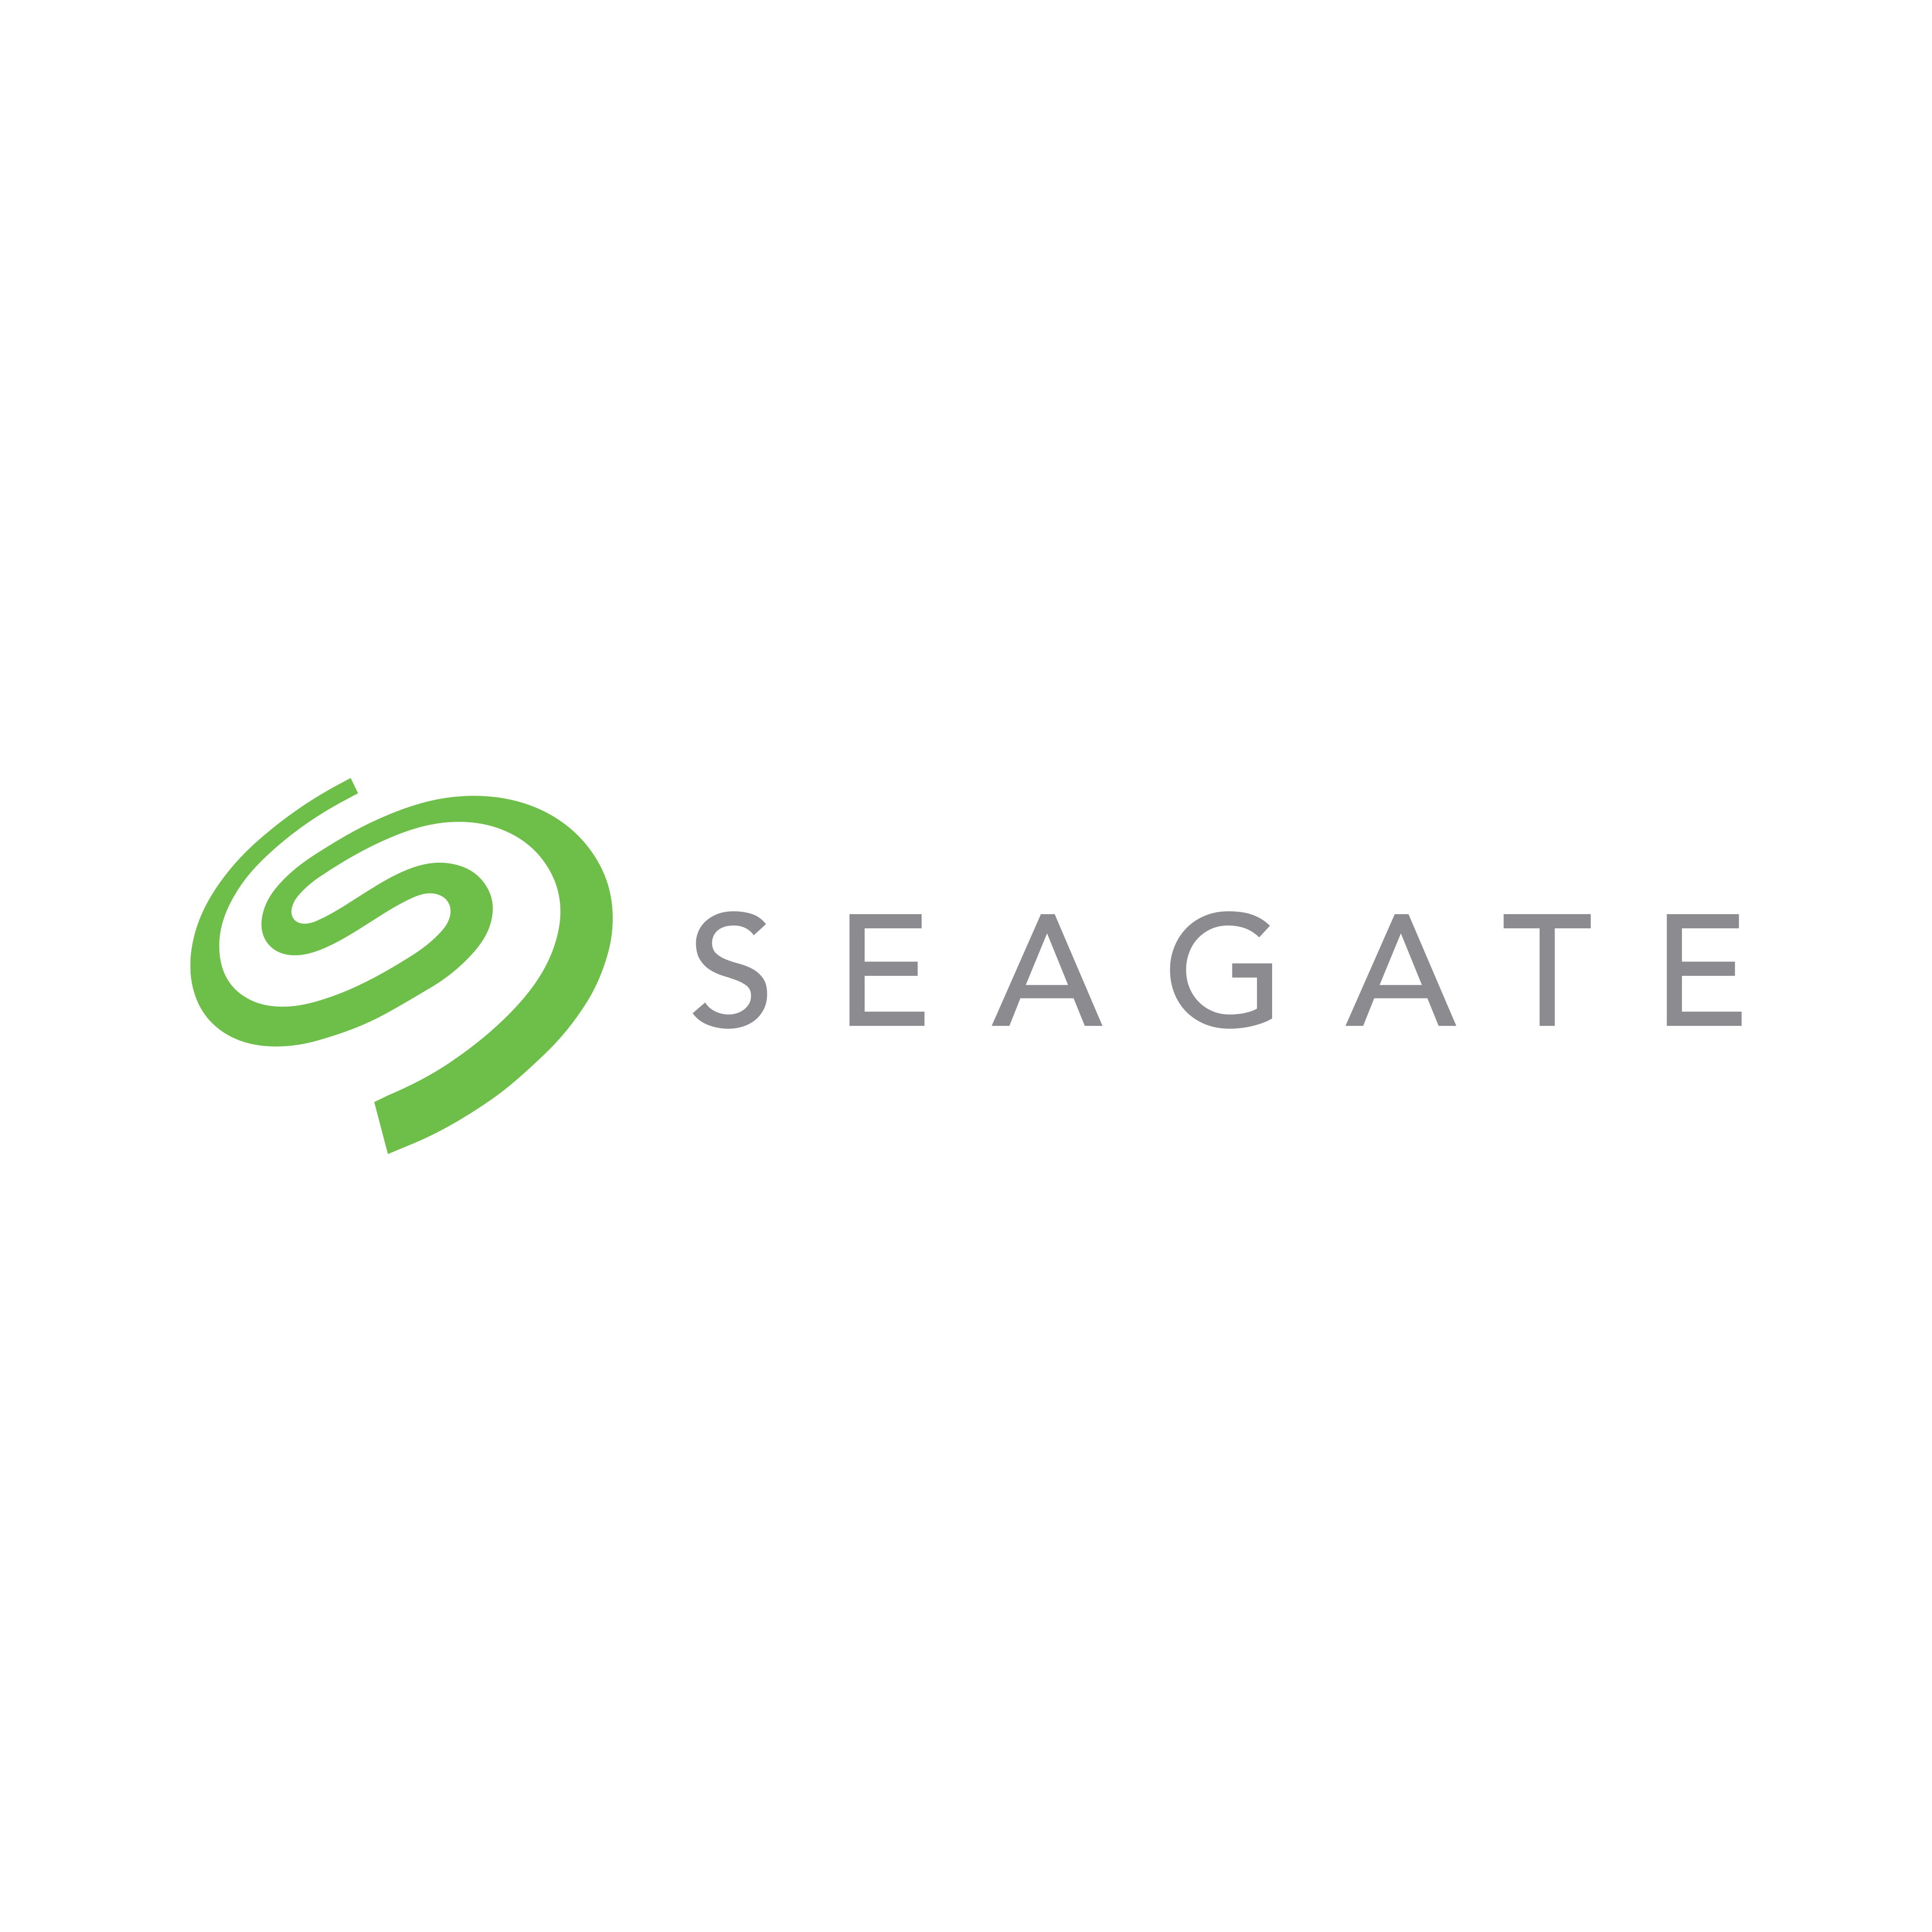 Seagate Logo PNG.